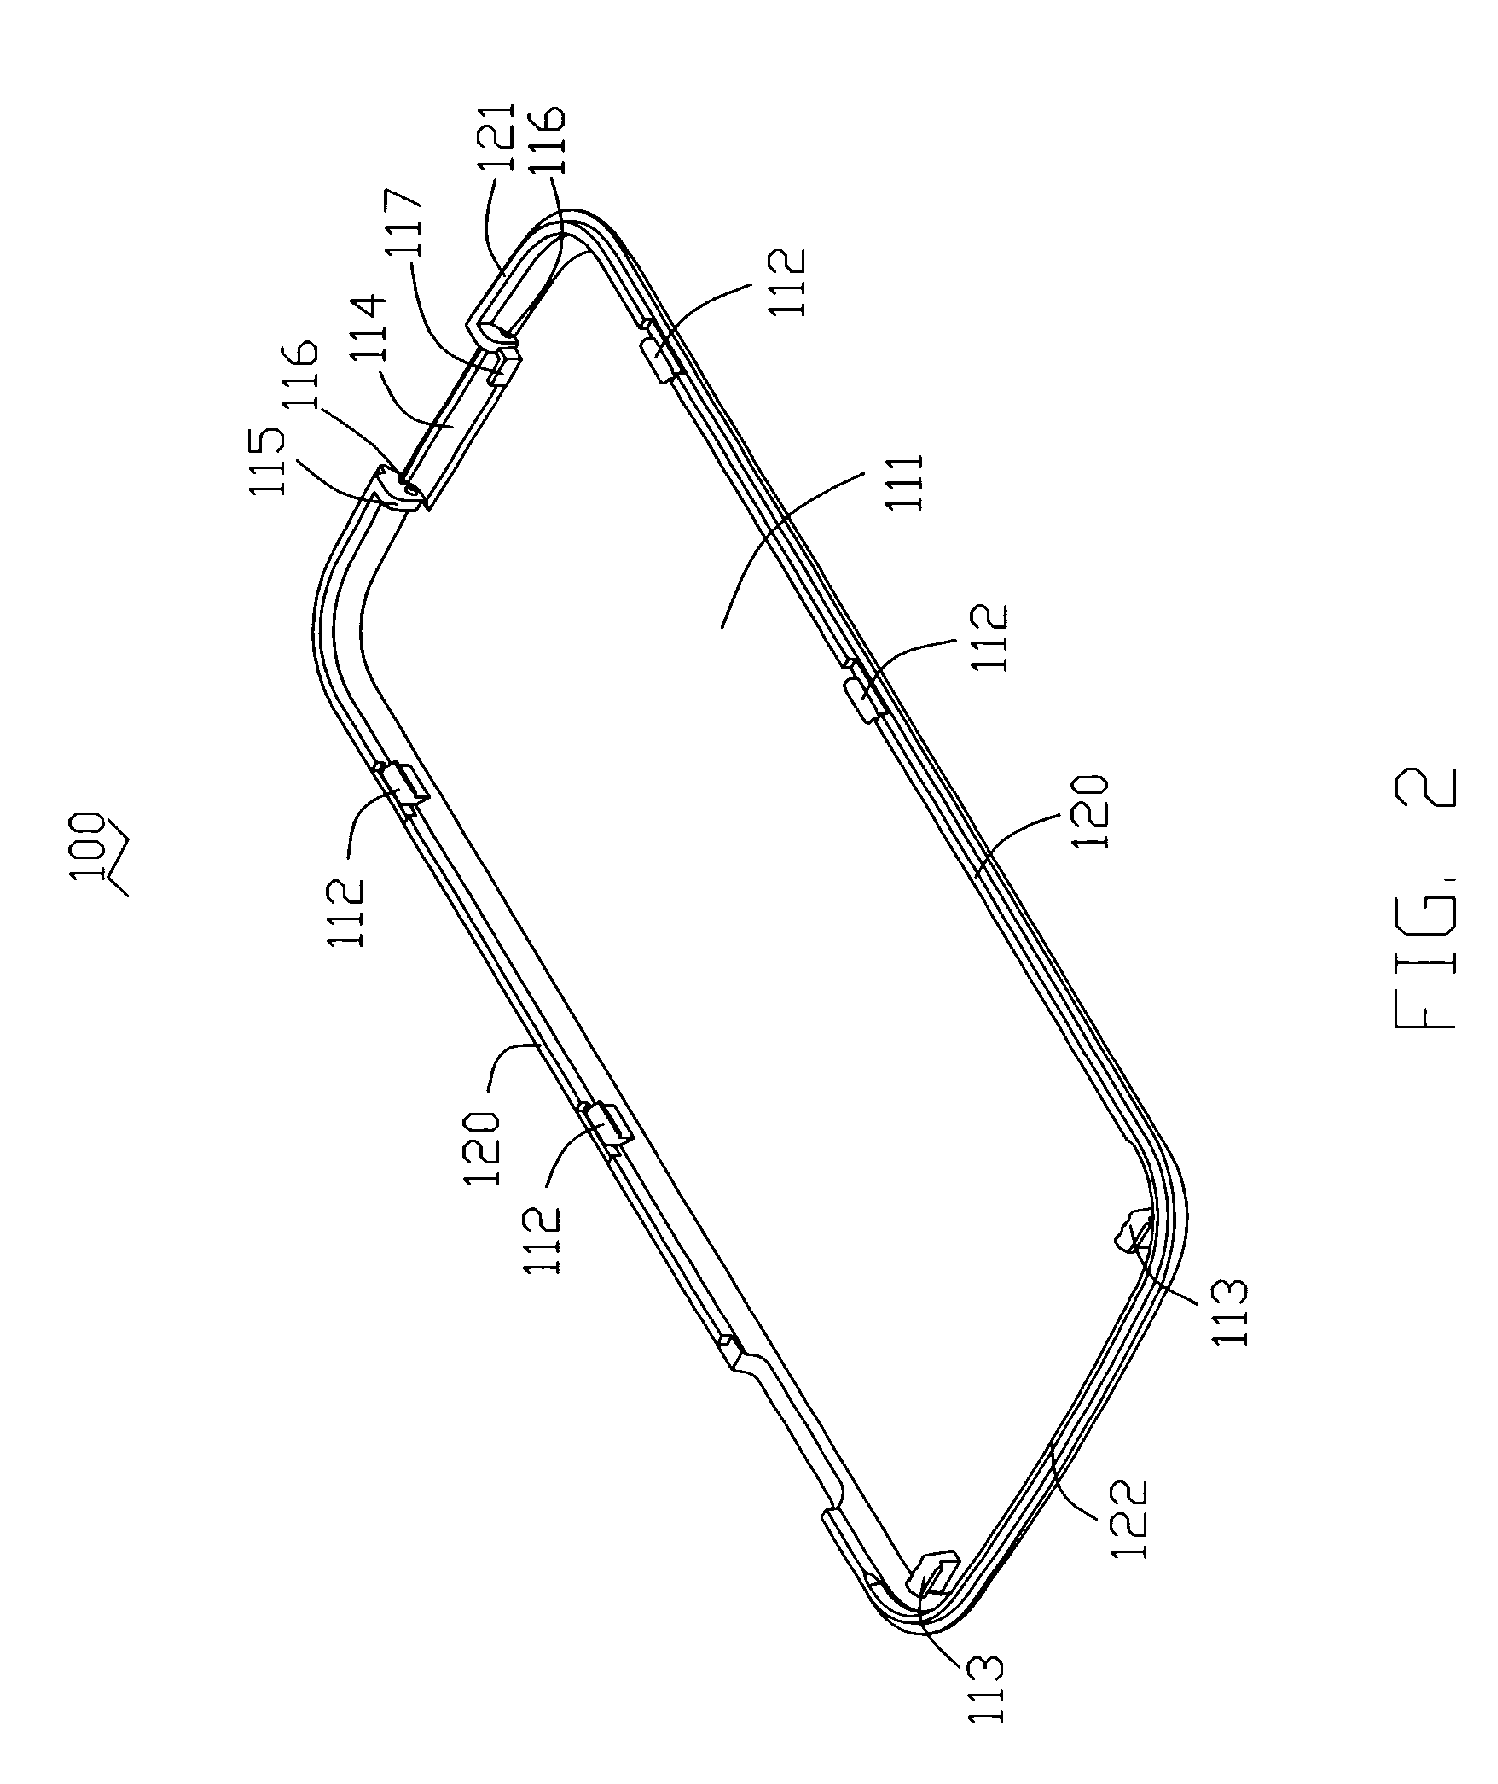 Battery cover latching assembly for portable electronic device